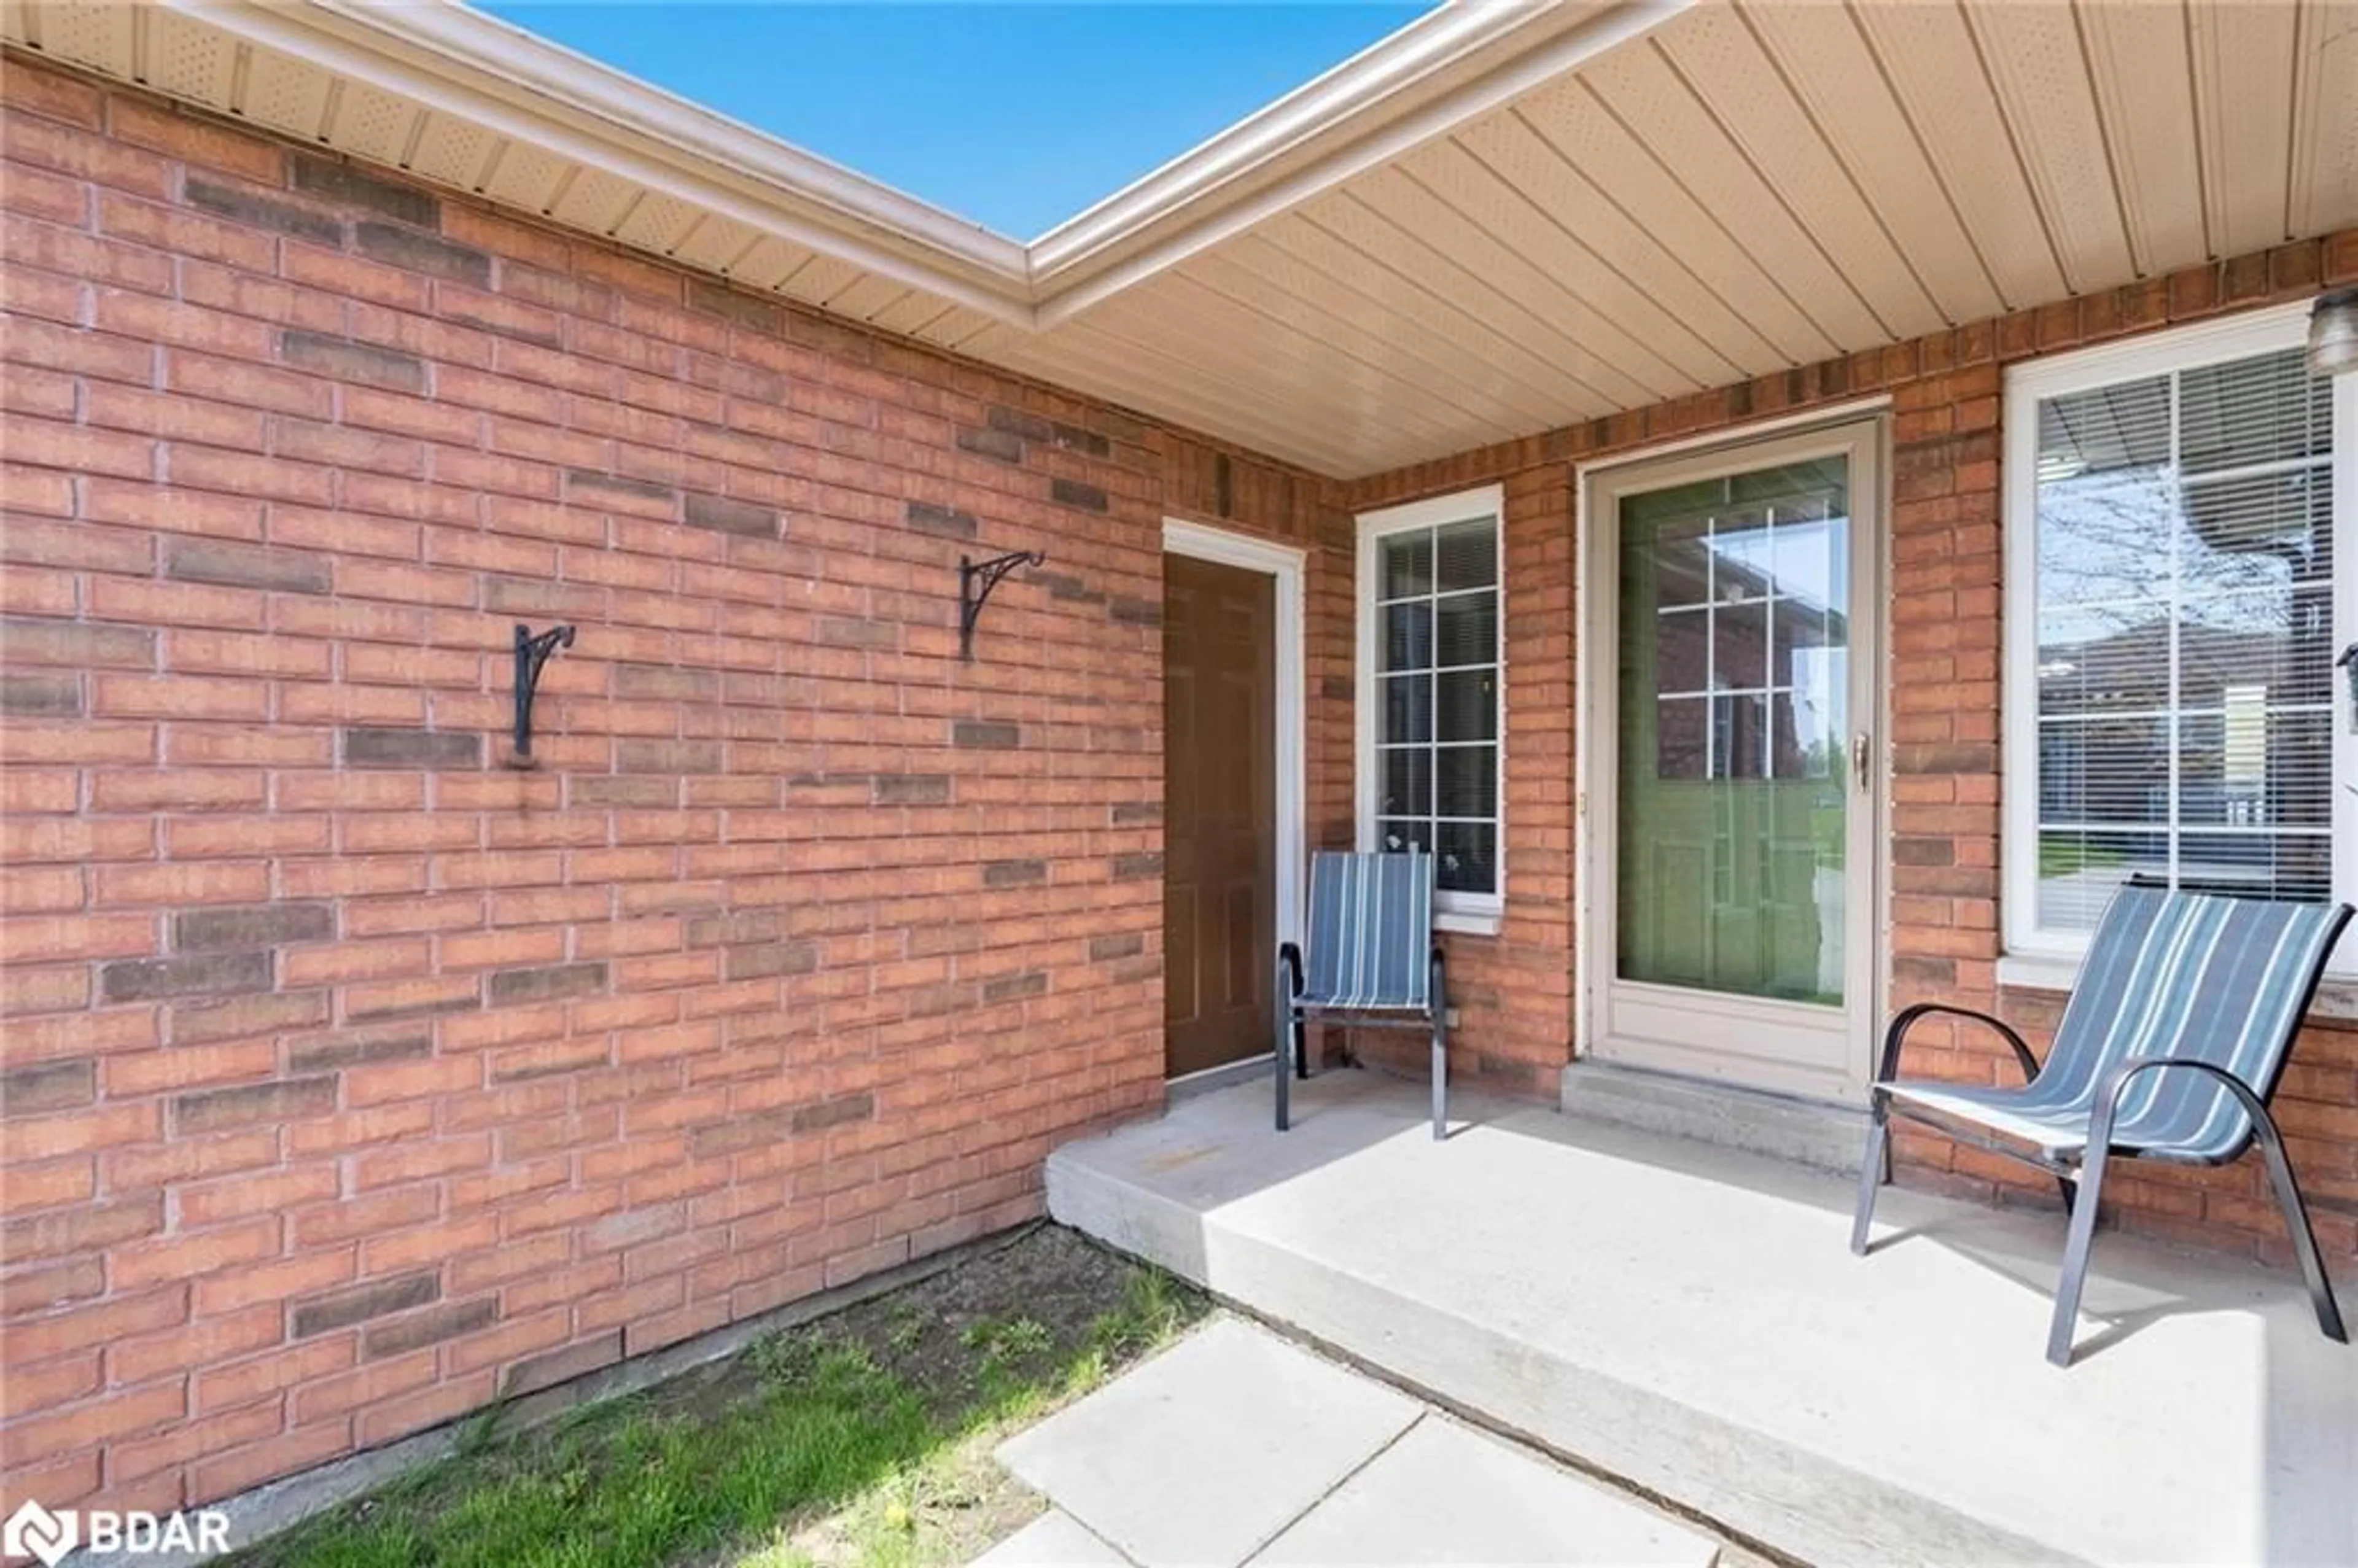 Home with brick exterior material for 4 Marjoy Ave, Barrie Ontario L4M 6N6